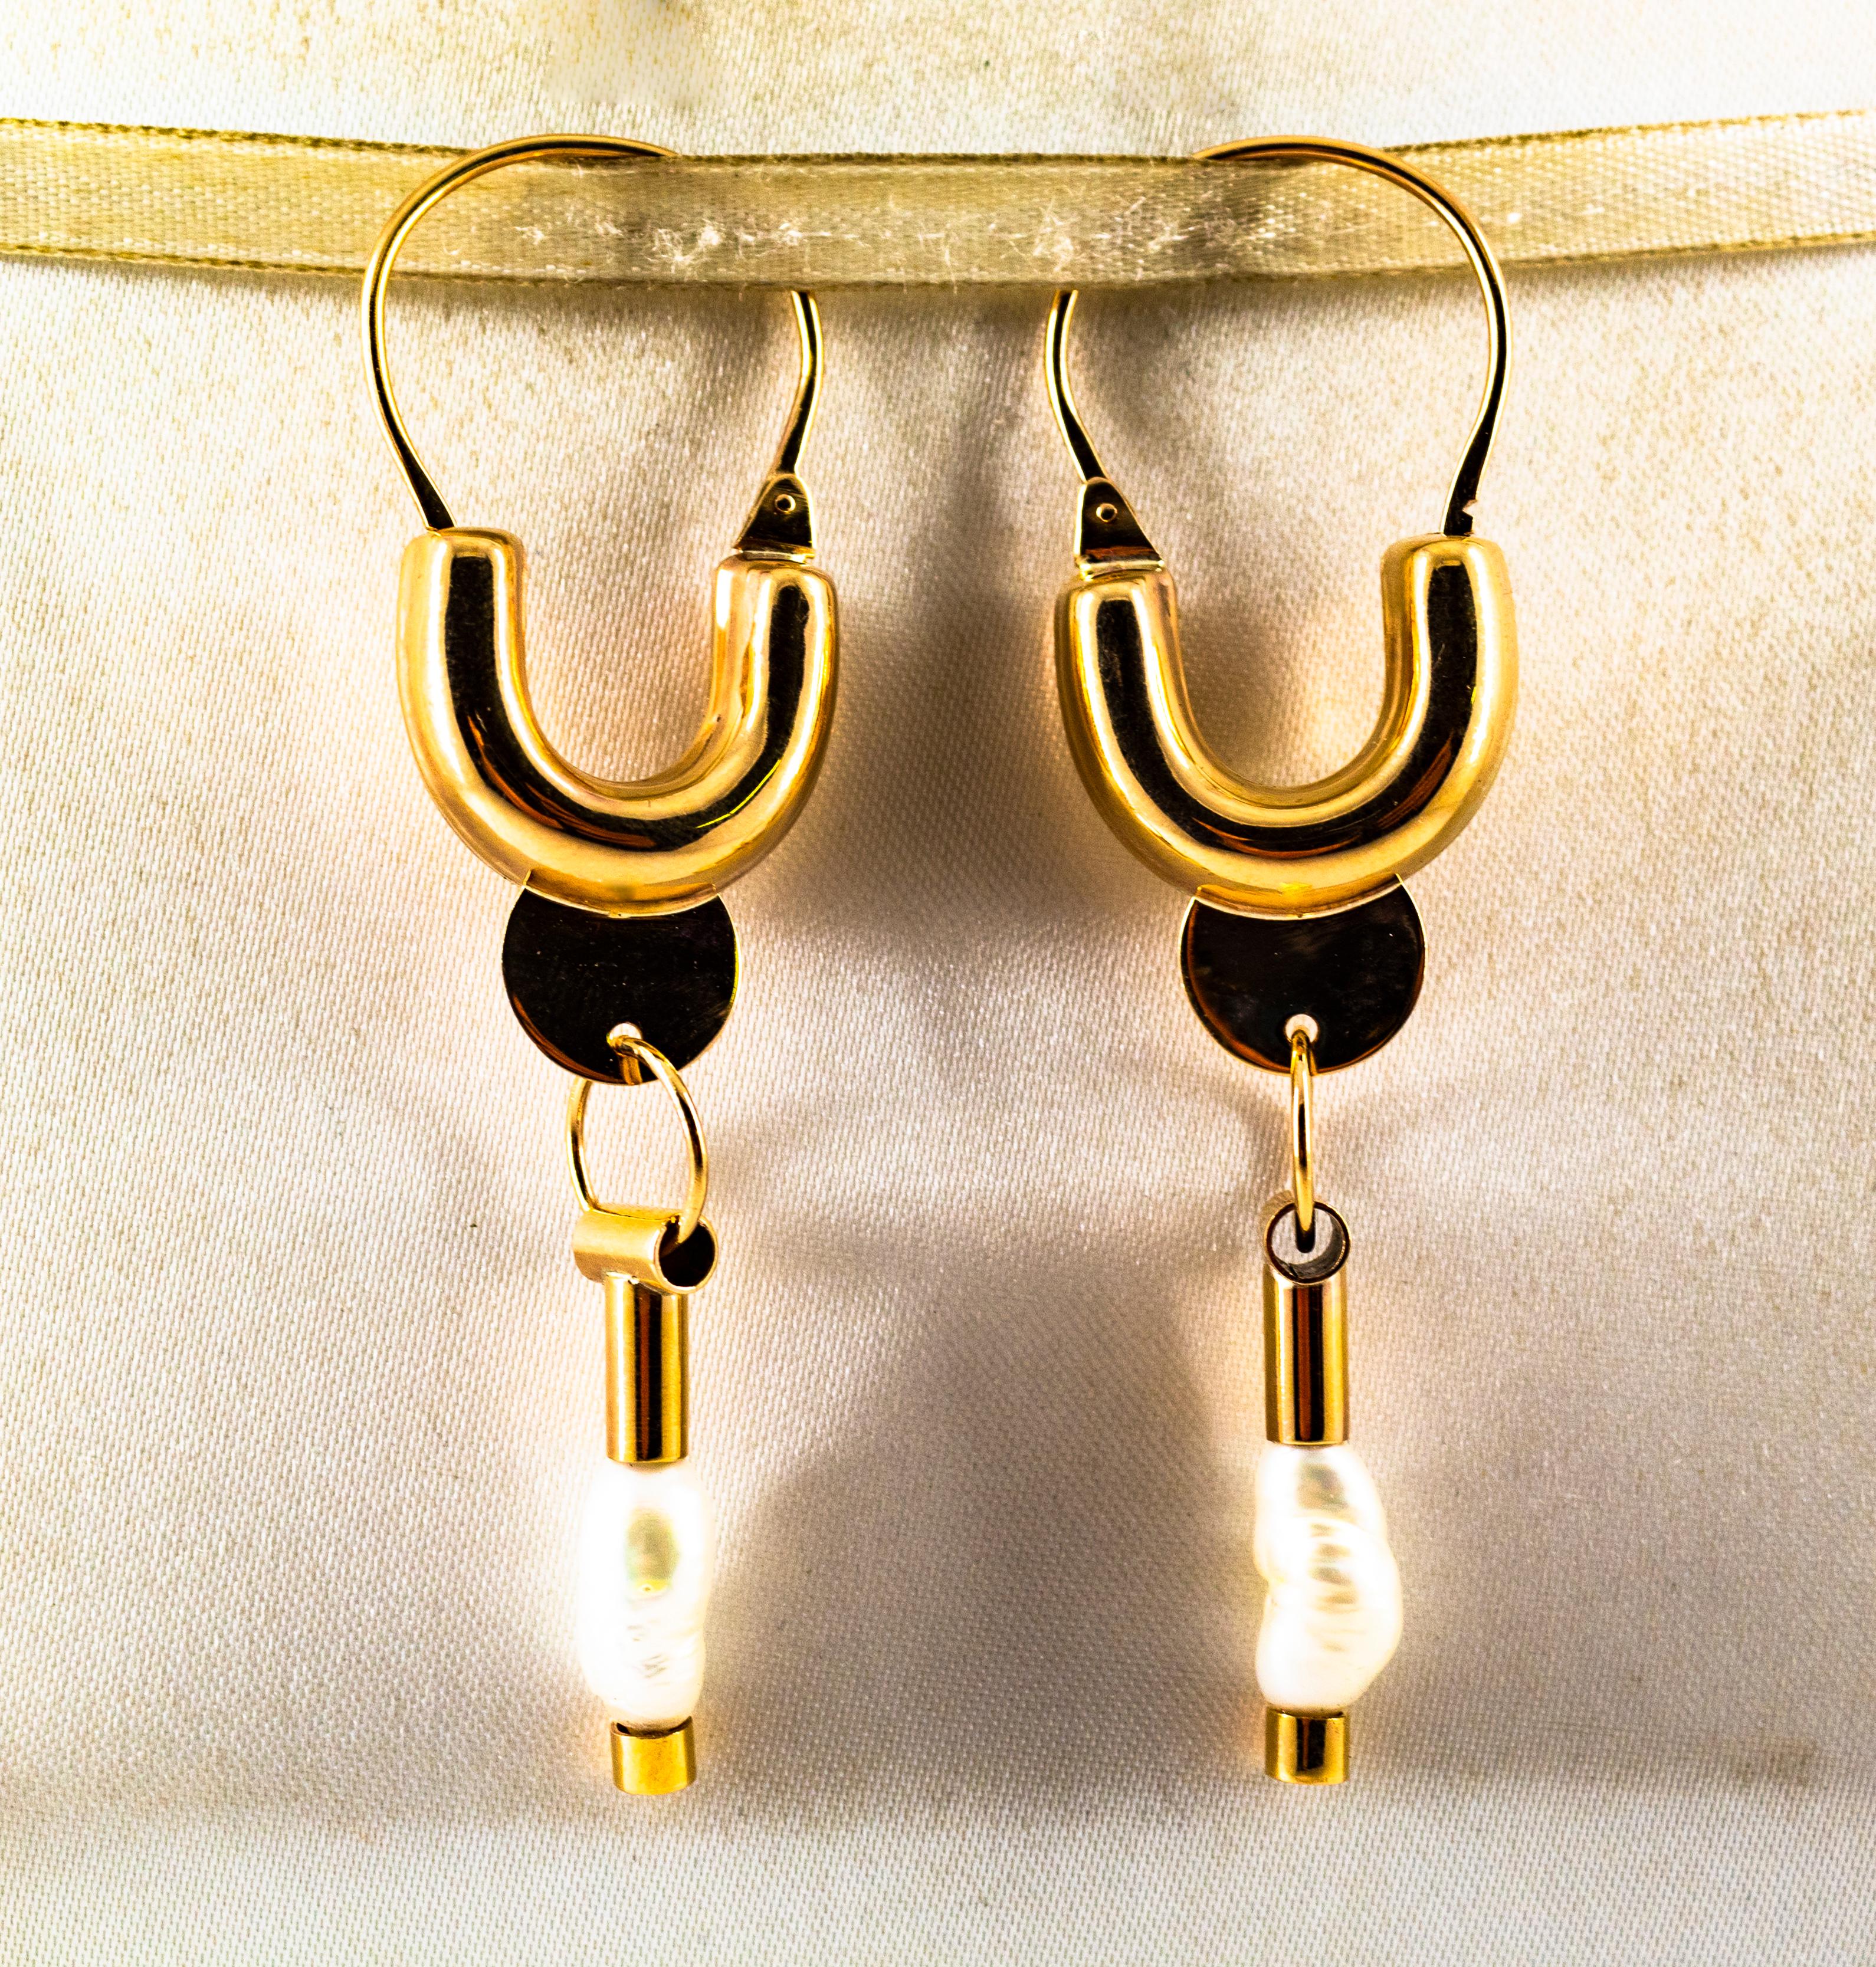 For any problems related to some materials contained in the items that do not allow shipping, please contact the seller with a private message to solve the problem.
We can ship every piece of our 1stdibs catalog worldwide.

These Lever-Back Earrings